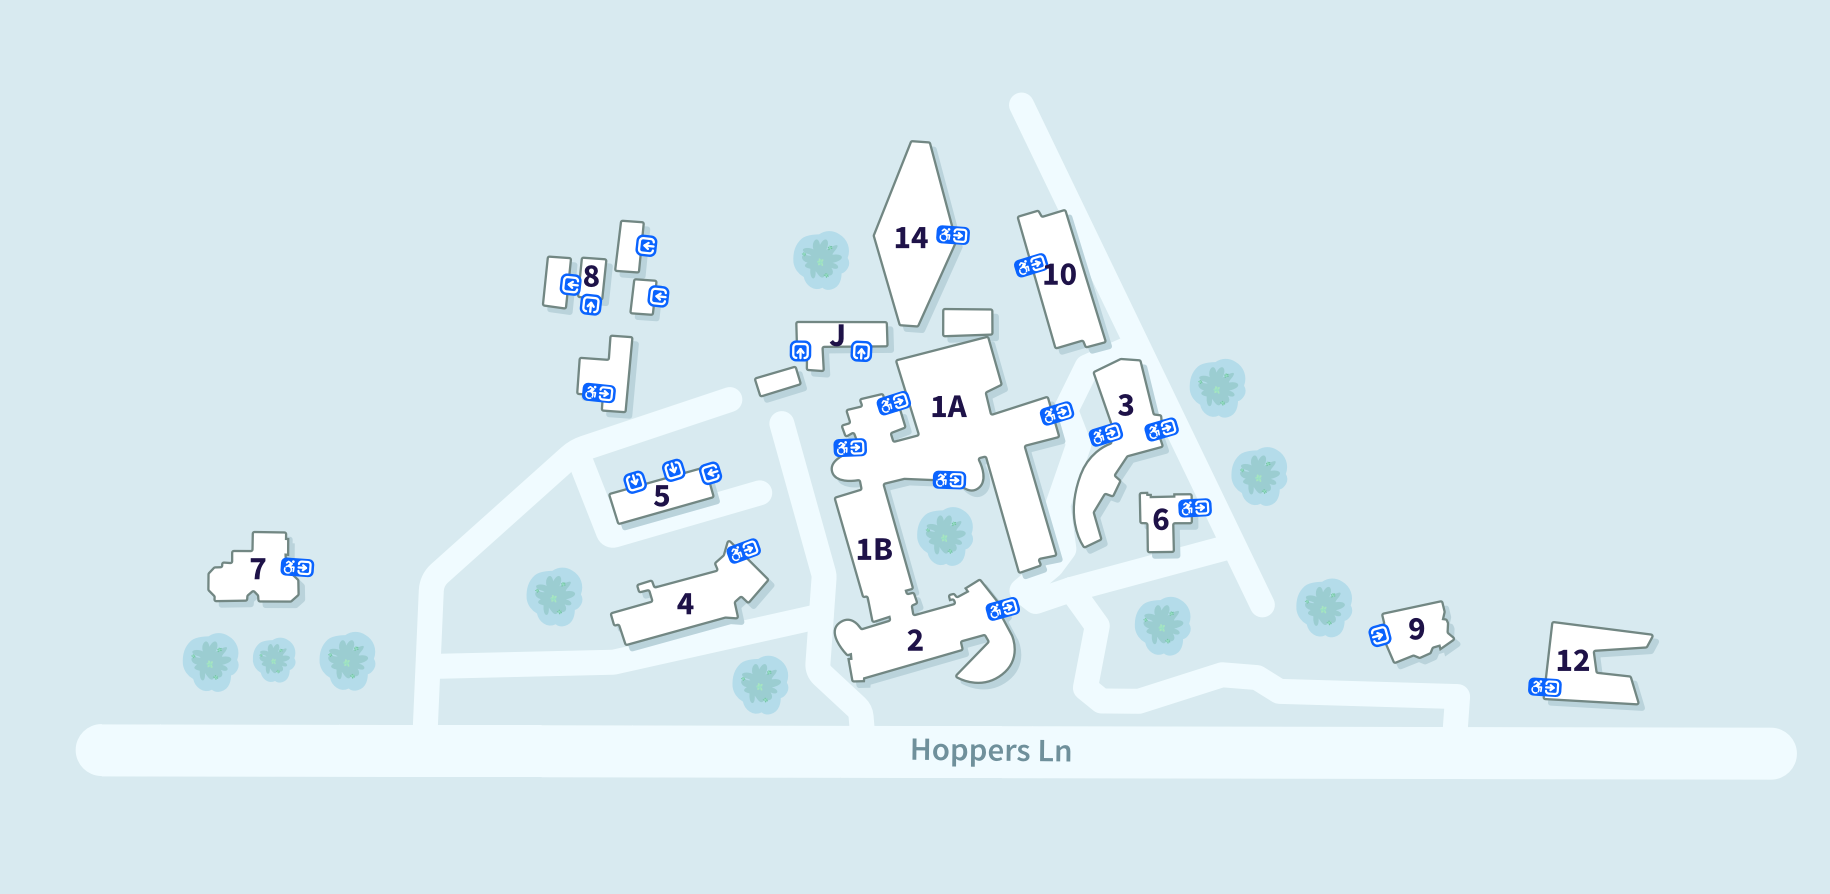 VU Werribee Campus map showing the following buildings and their accessible entrances, from L-R: 7, 8, 5, 4, J, 14, 1B, 2, 1A, 10, 3, 6, 9, 12. Buildings 8, 5, J and 9 have no accessible entrances shown.